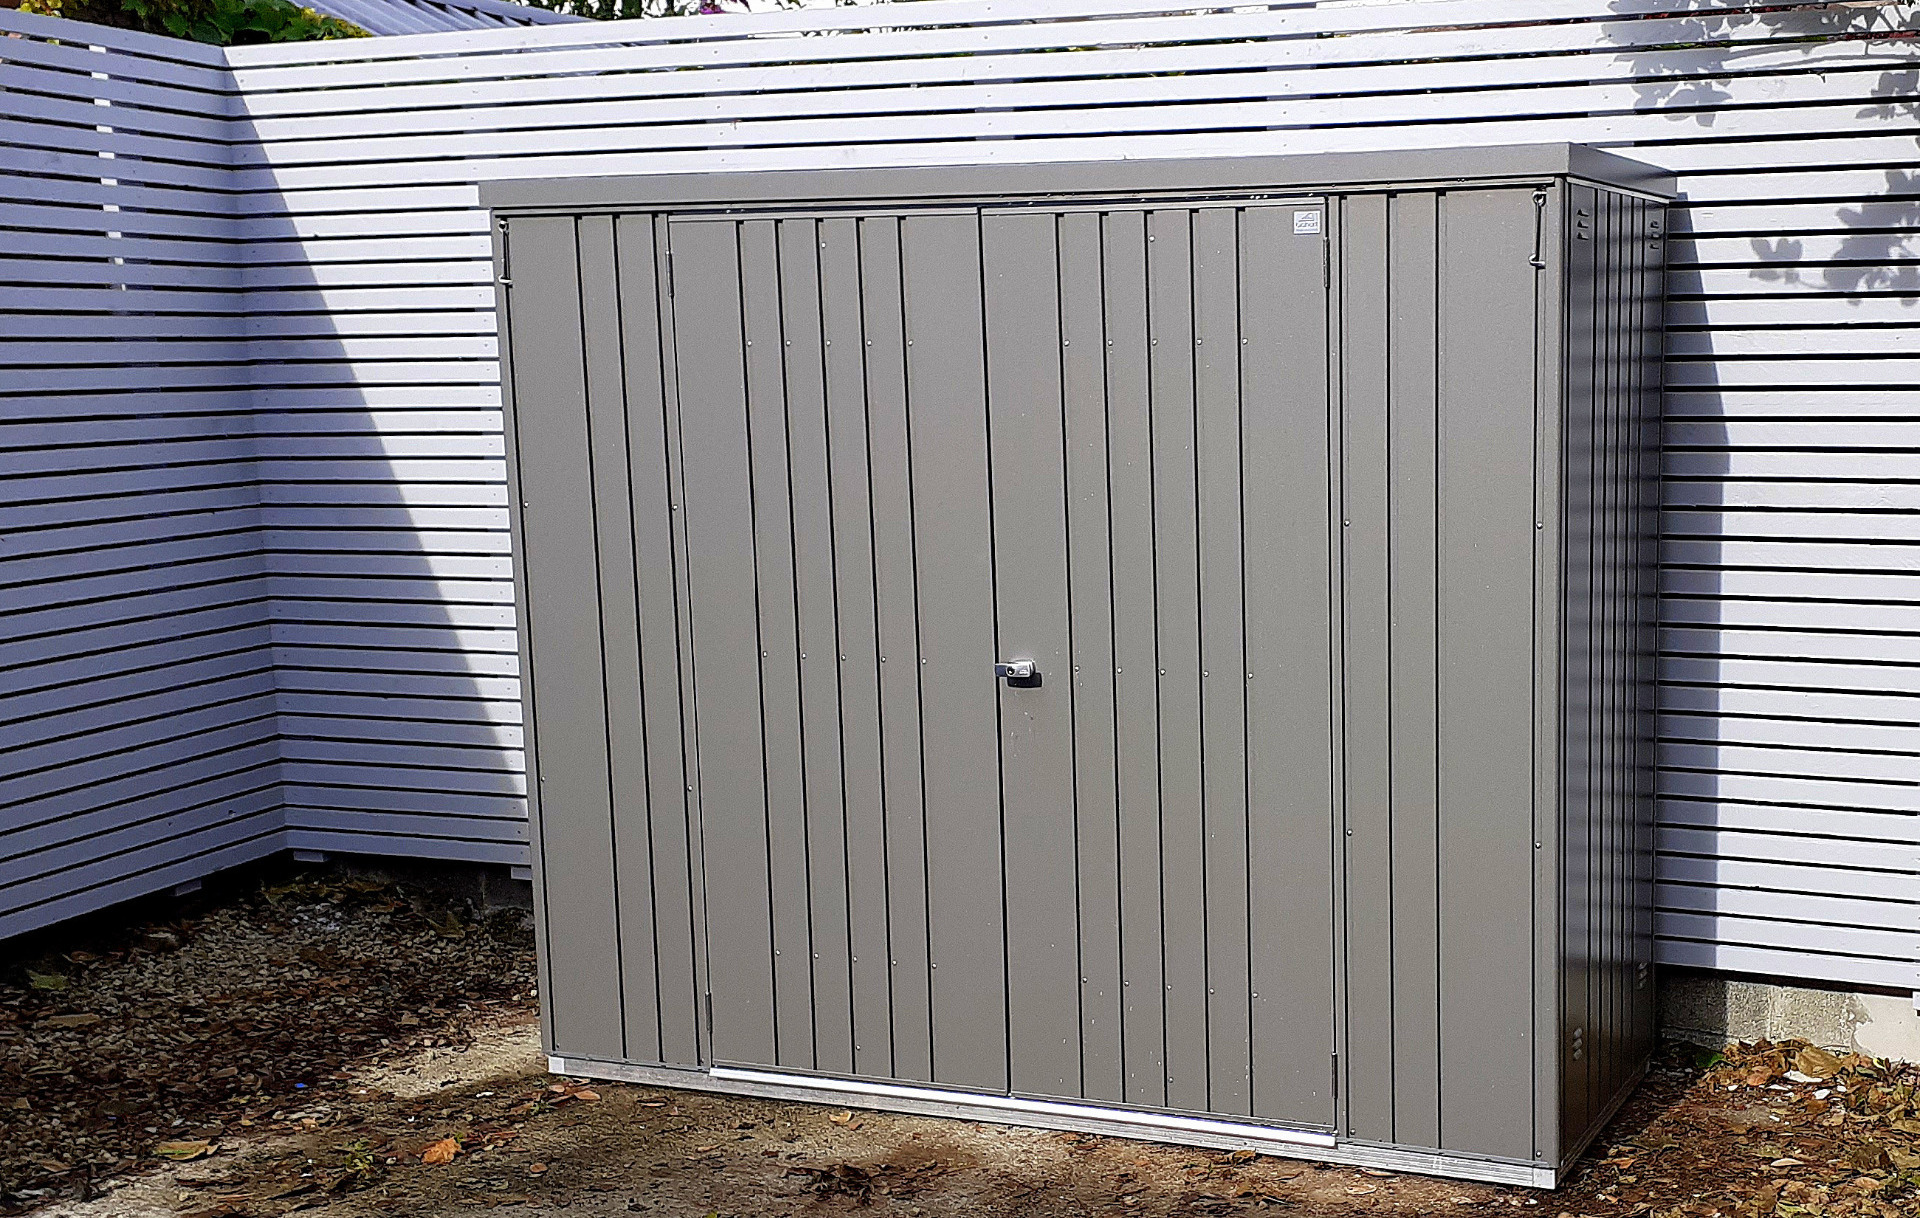 The superb quality and style of the Biohort Equipment Locker 230 in metallic quartz grey  | supplied + installed in Balinteer by Owen Chubb Landscapers. Tel 087-2306 128.